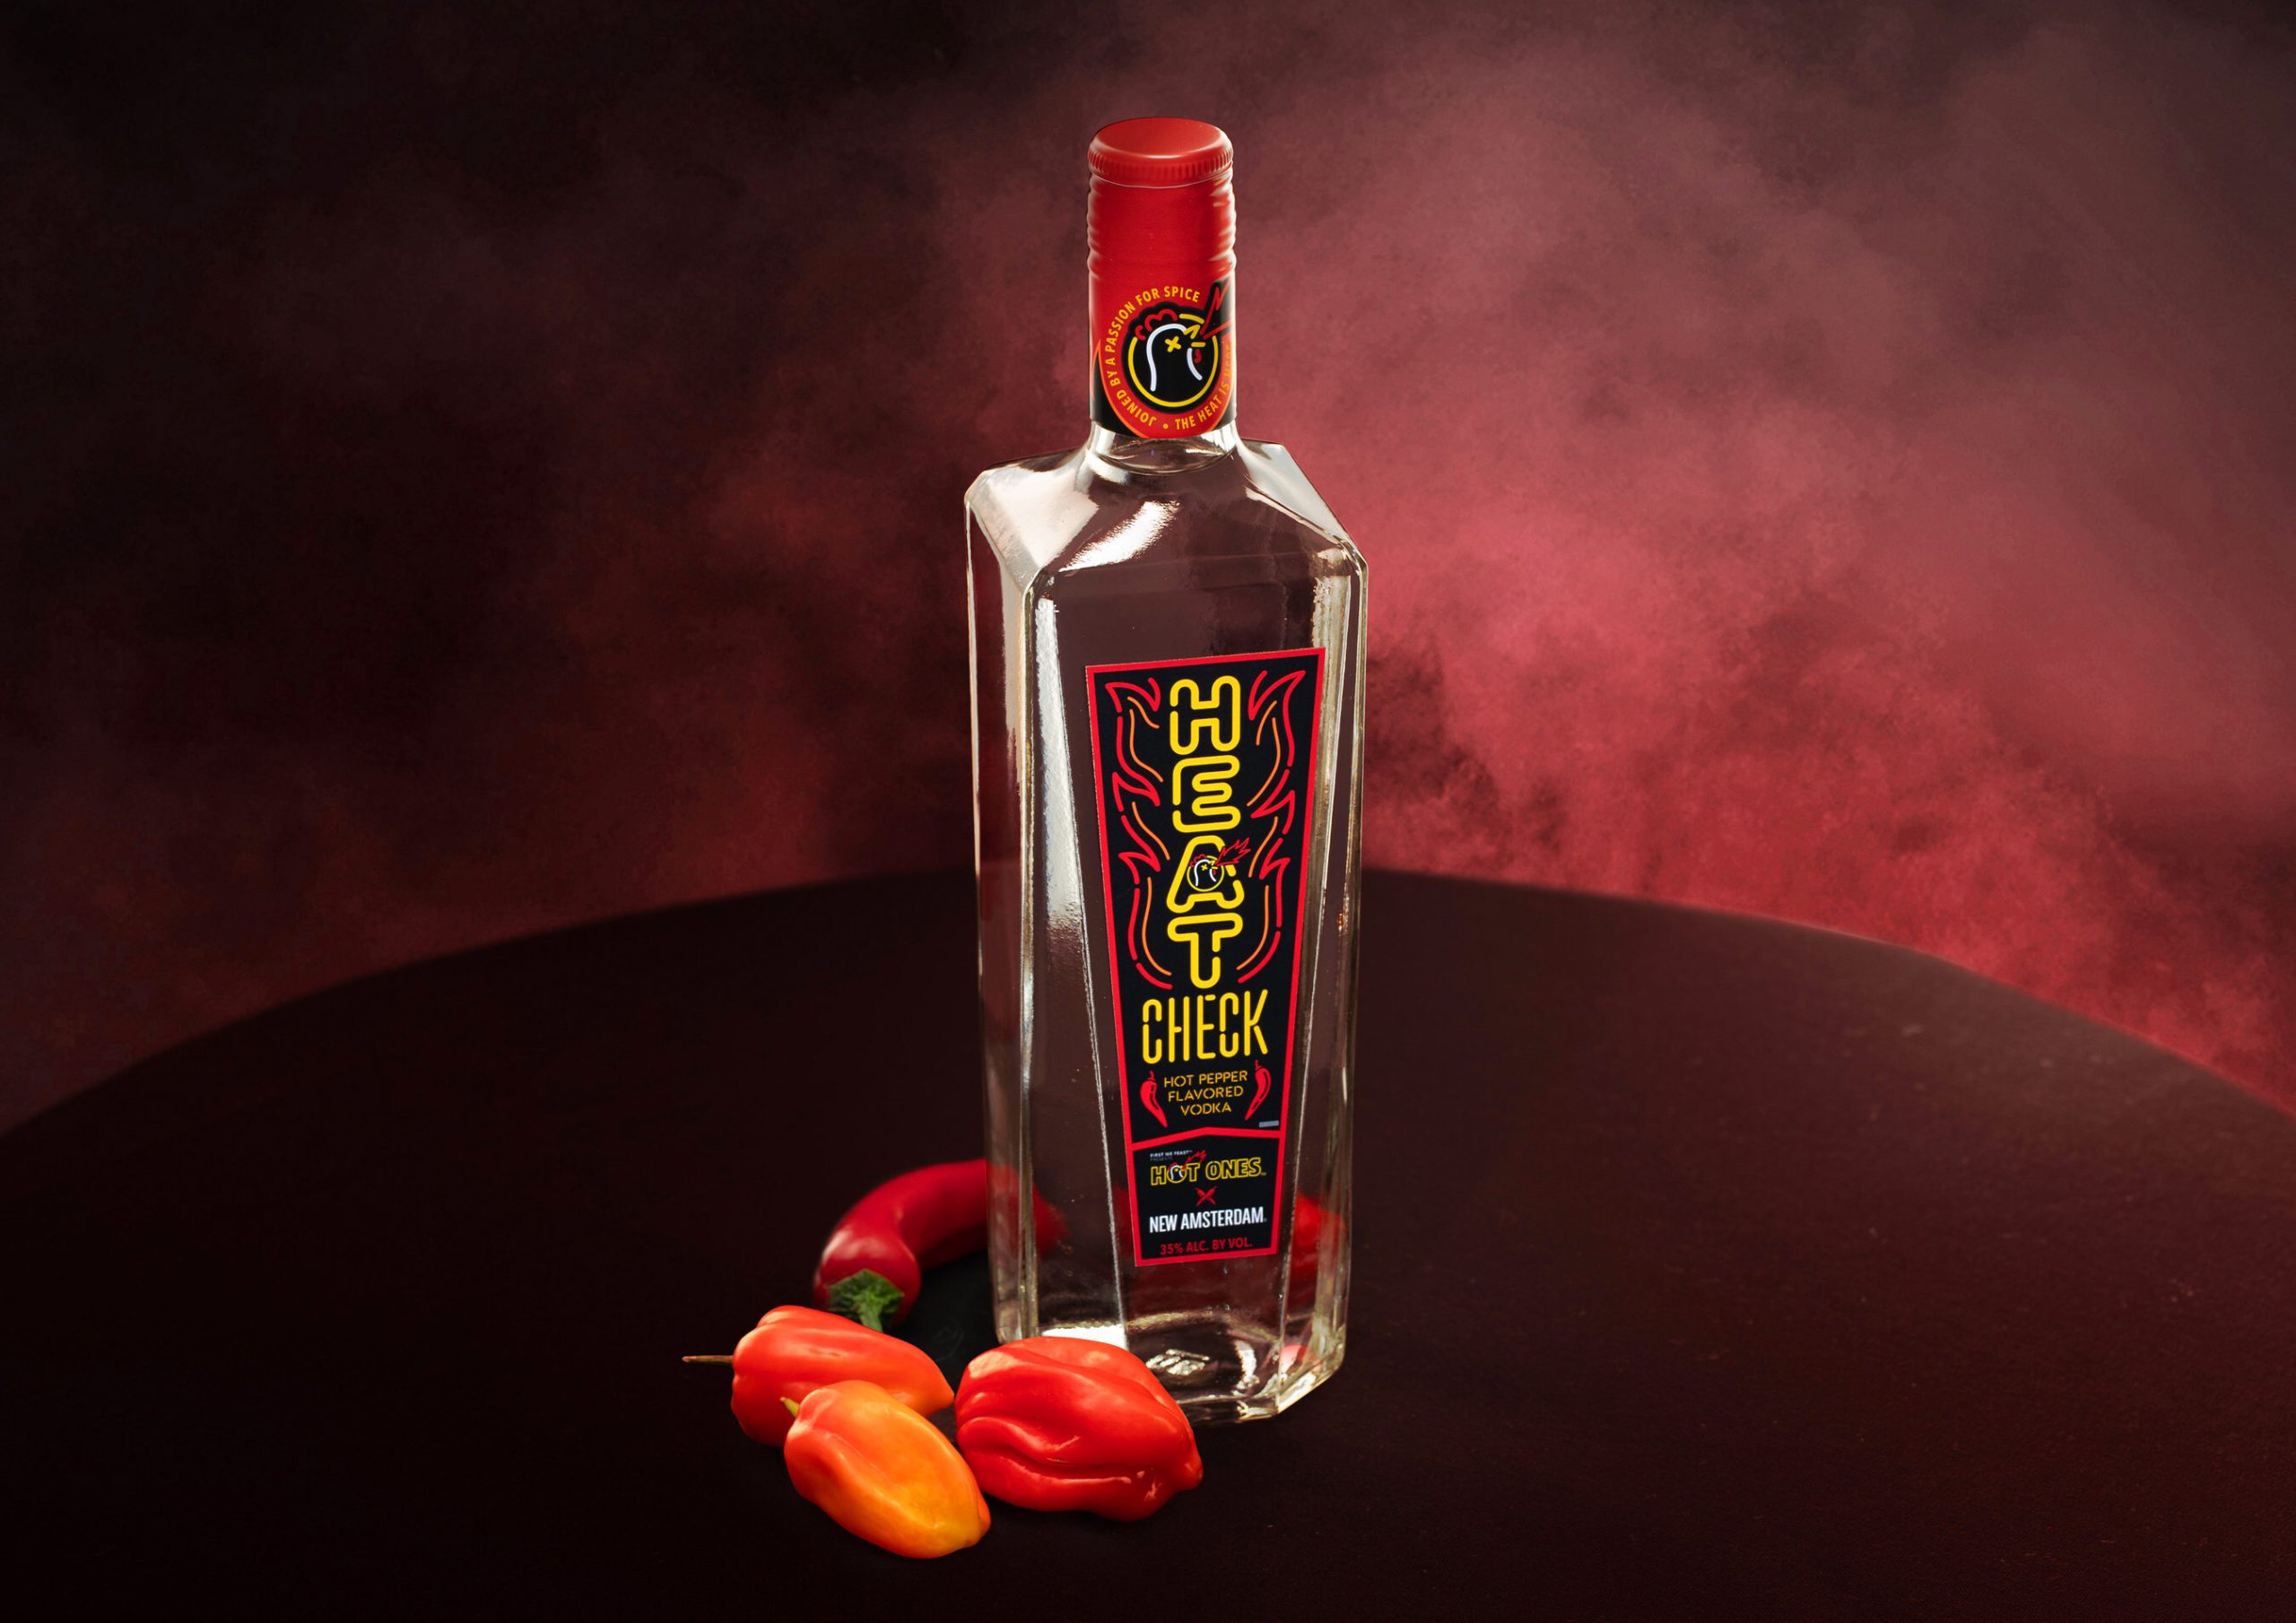 New Amsterdam Vodka Takes on the Spice Challenge Trend in a Collaboration with ‘Hot Ones’